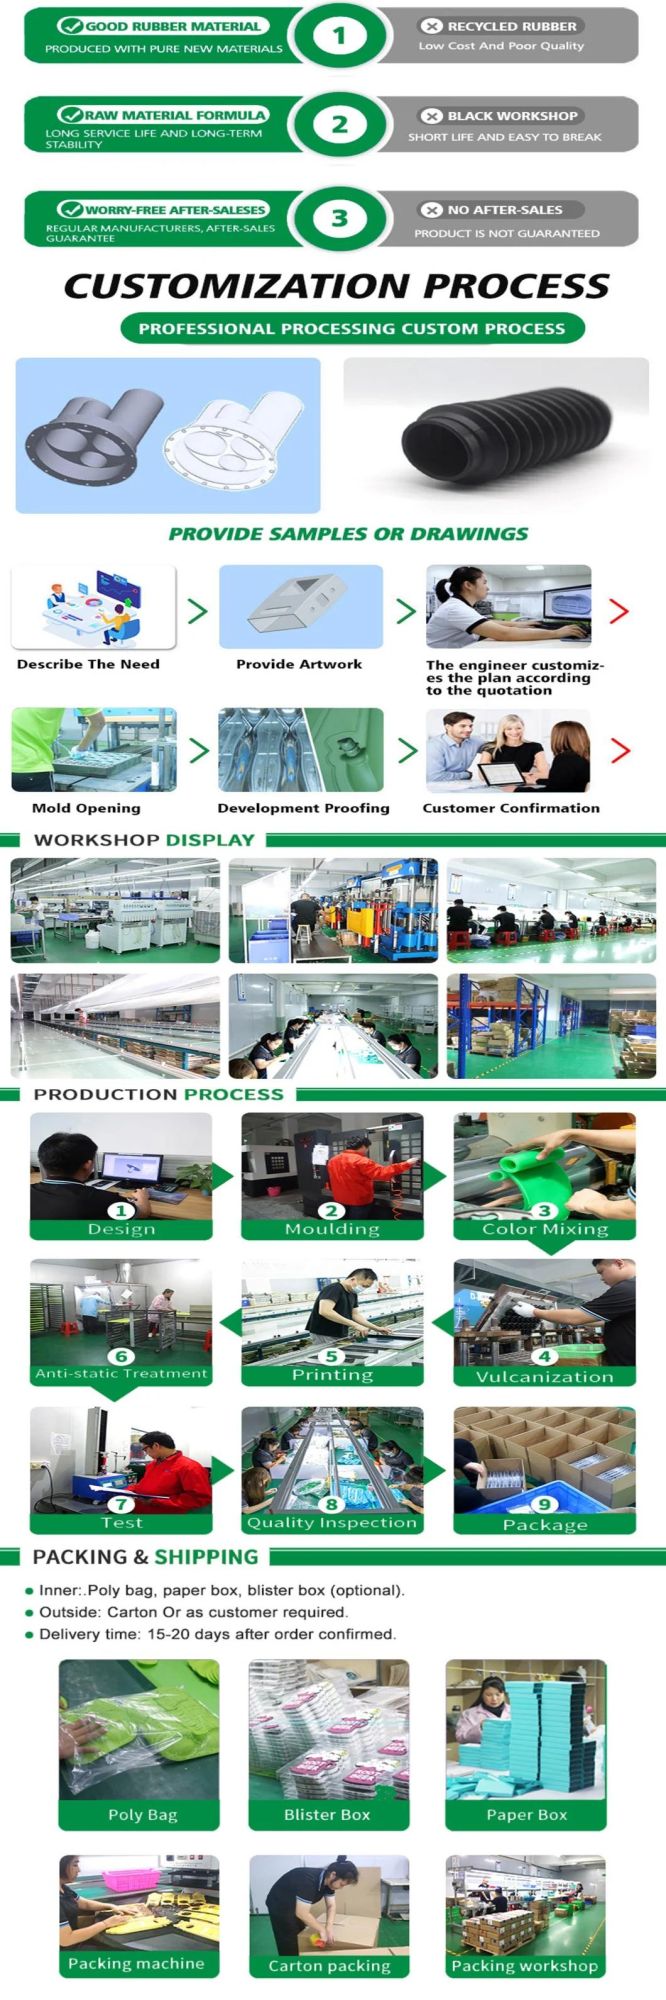 Customized Plastic Injection Moulding Products Electronic Office Equipment Plastic Cover